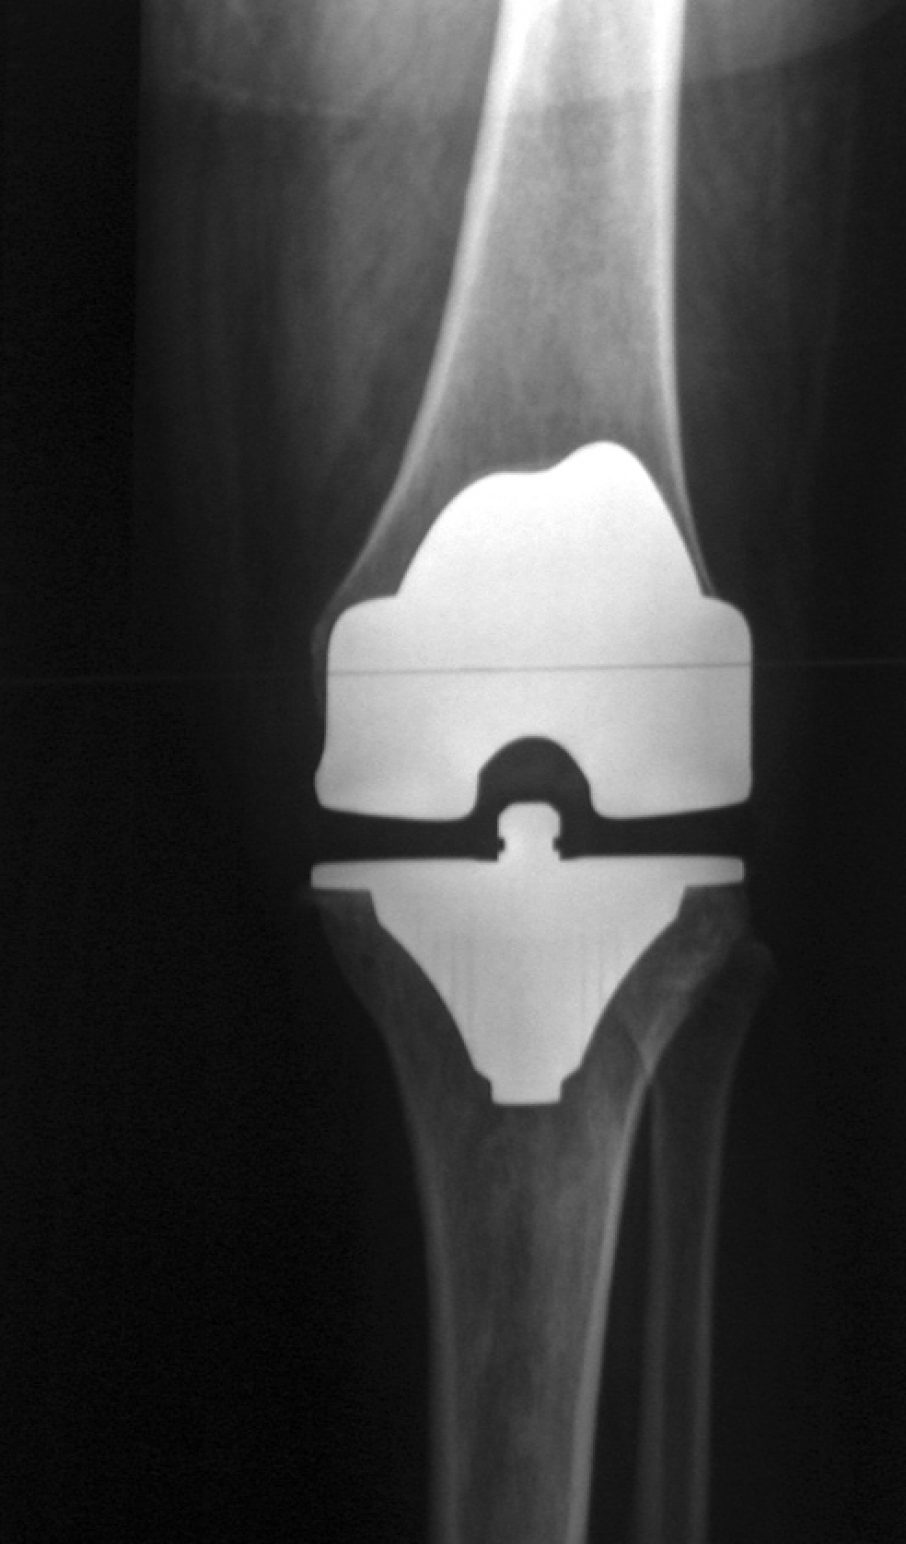 FDA produces 3D printing medical guidelines - 3DprinteDkneereplacement 1 906x1544